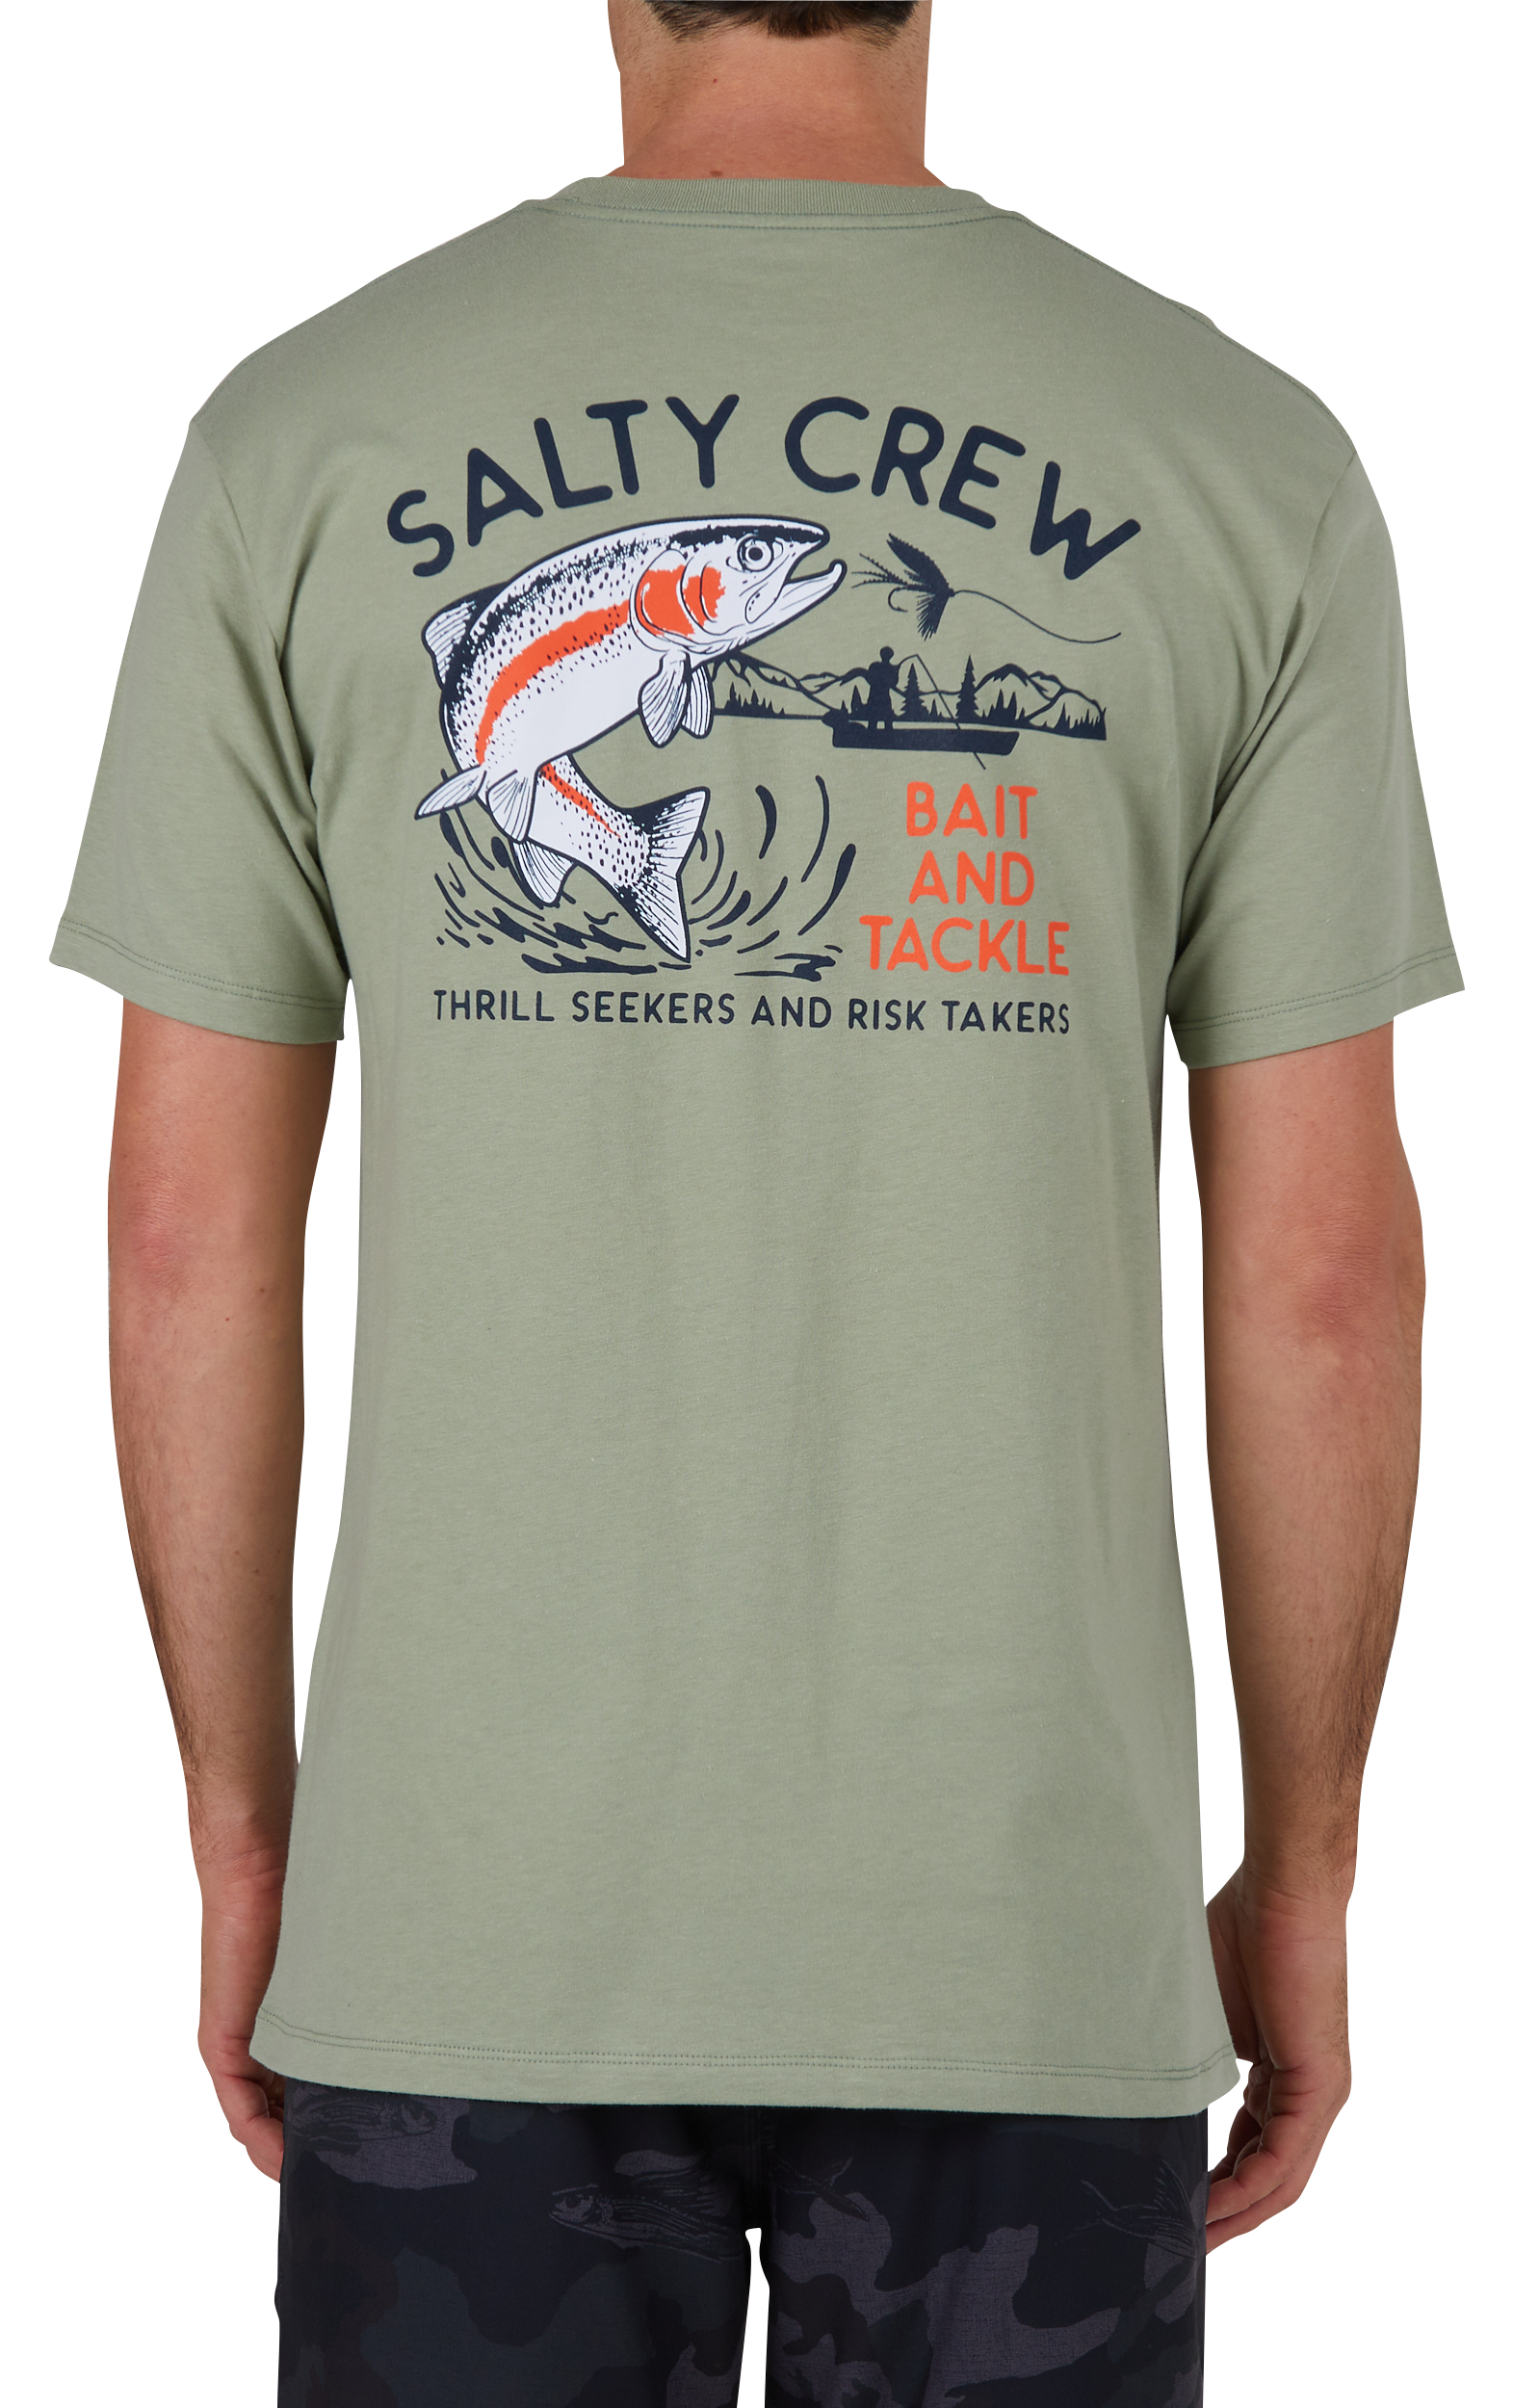 Salty Crew Premium Fly Trap Graphic Short-Sleeve T-Shirt for Men